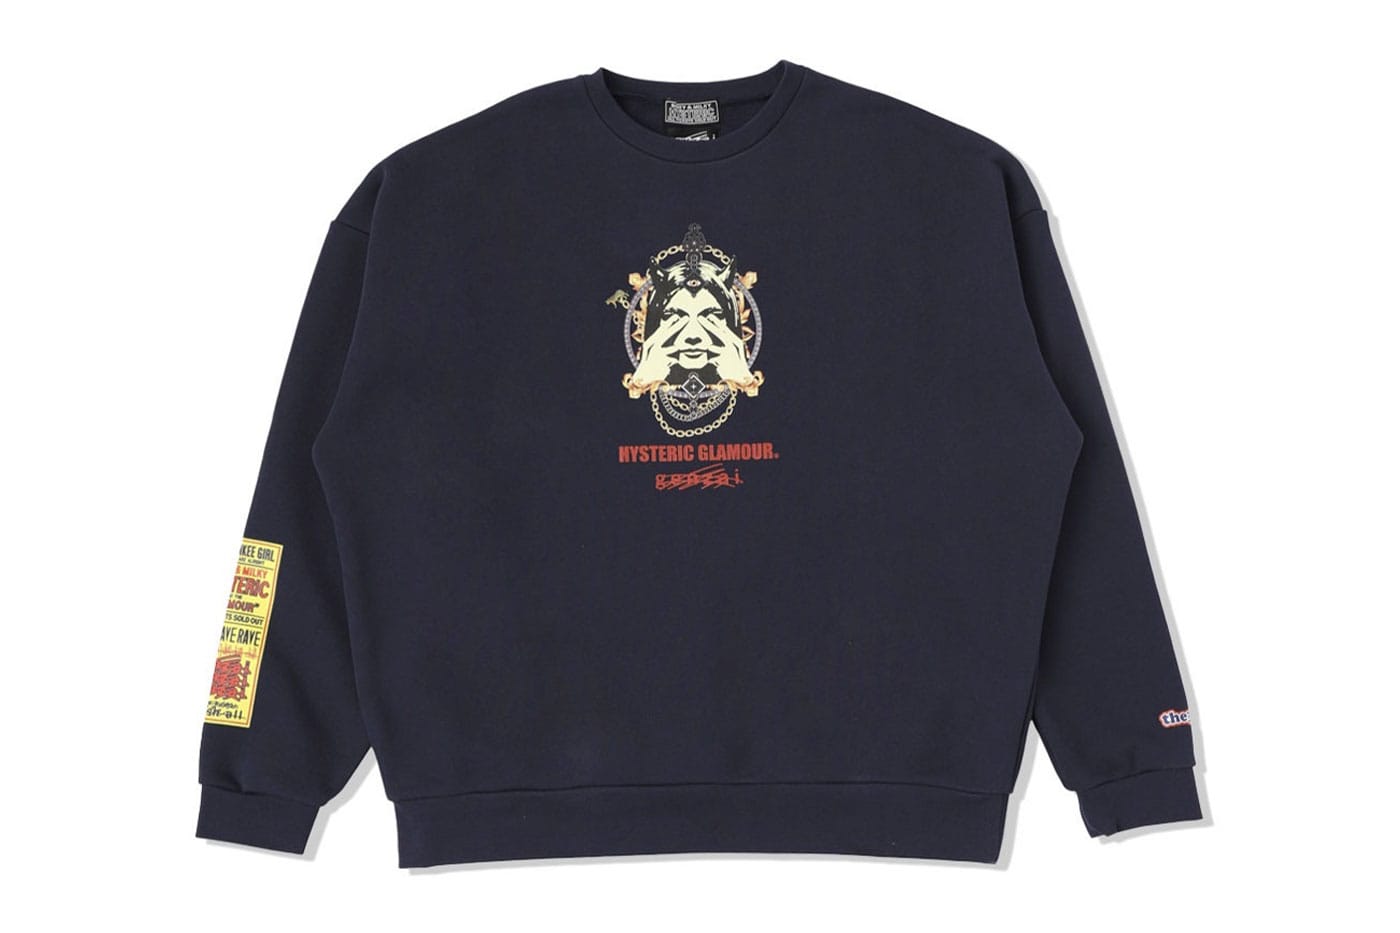 genzai x HYSTERIC GLAMOUR Capsule Collection | Hypebeast